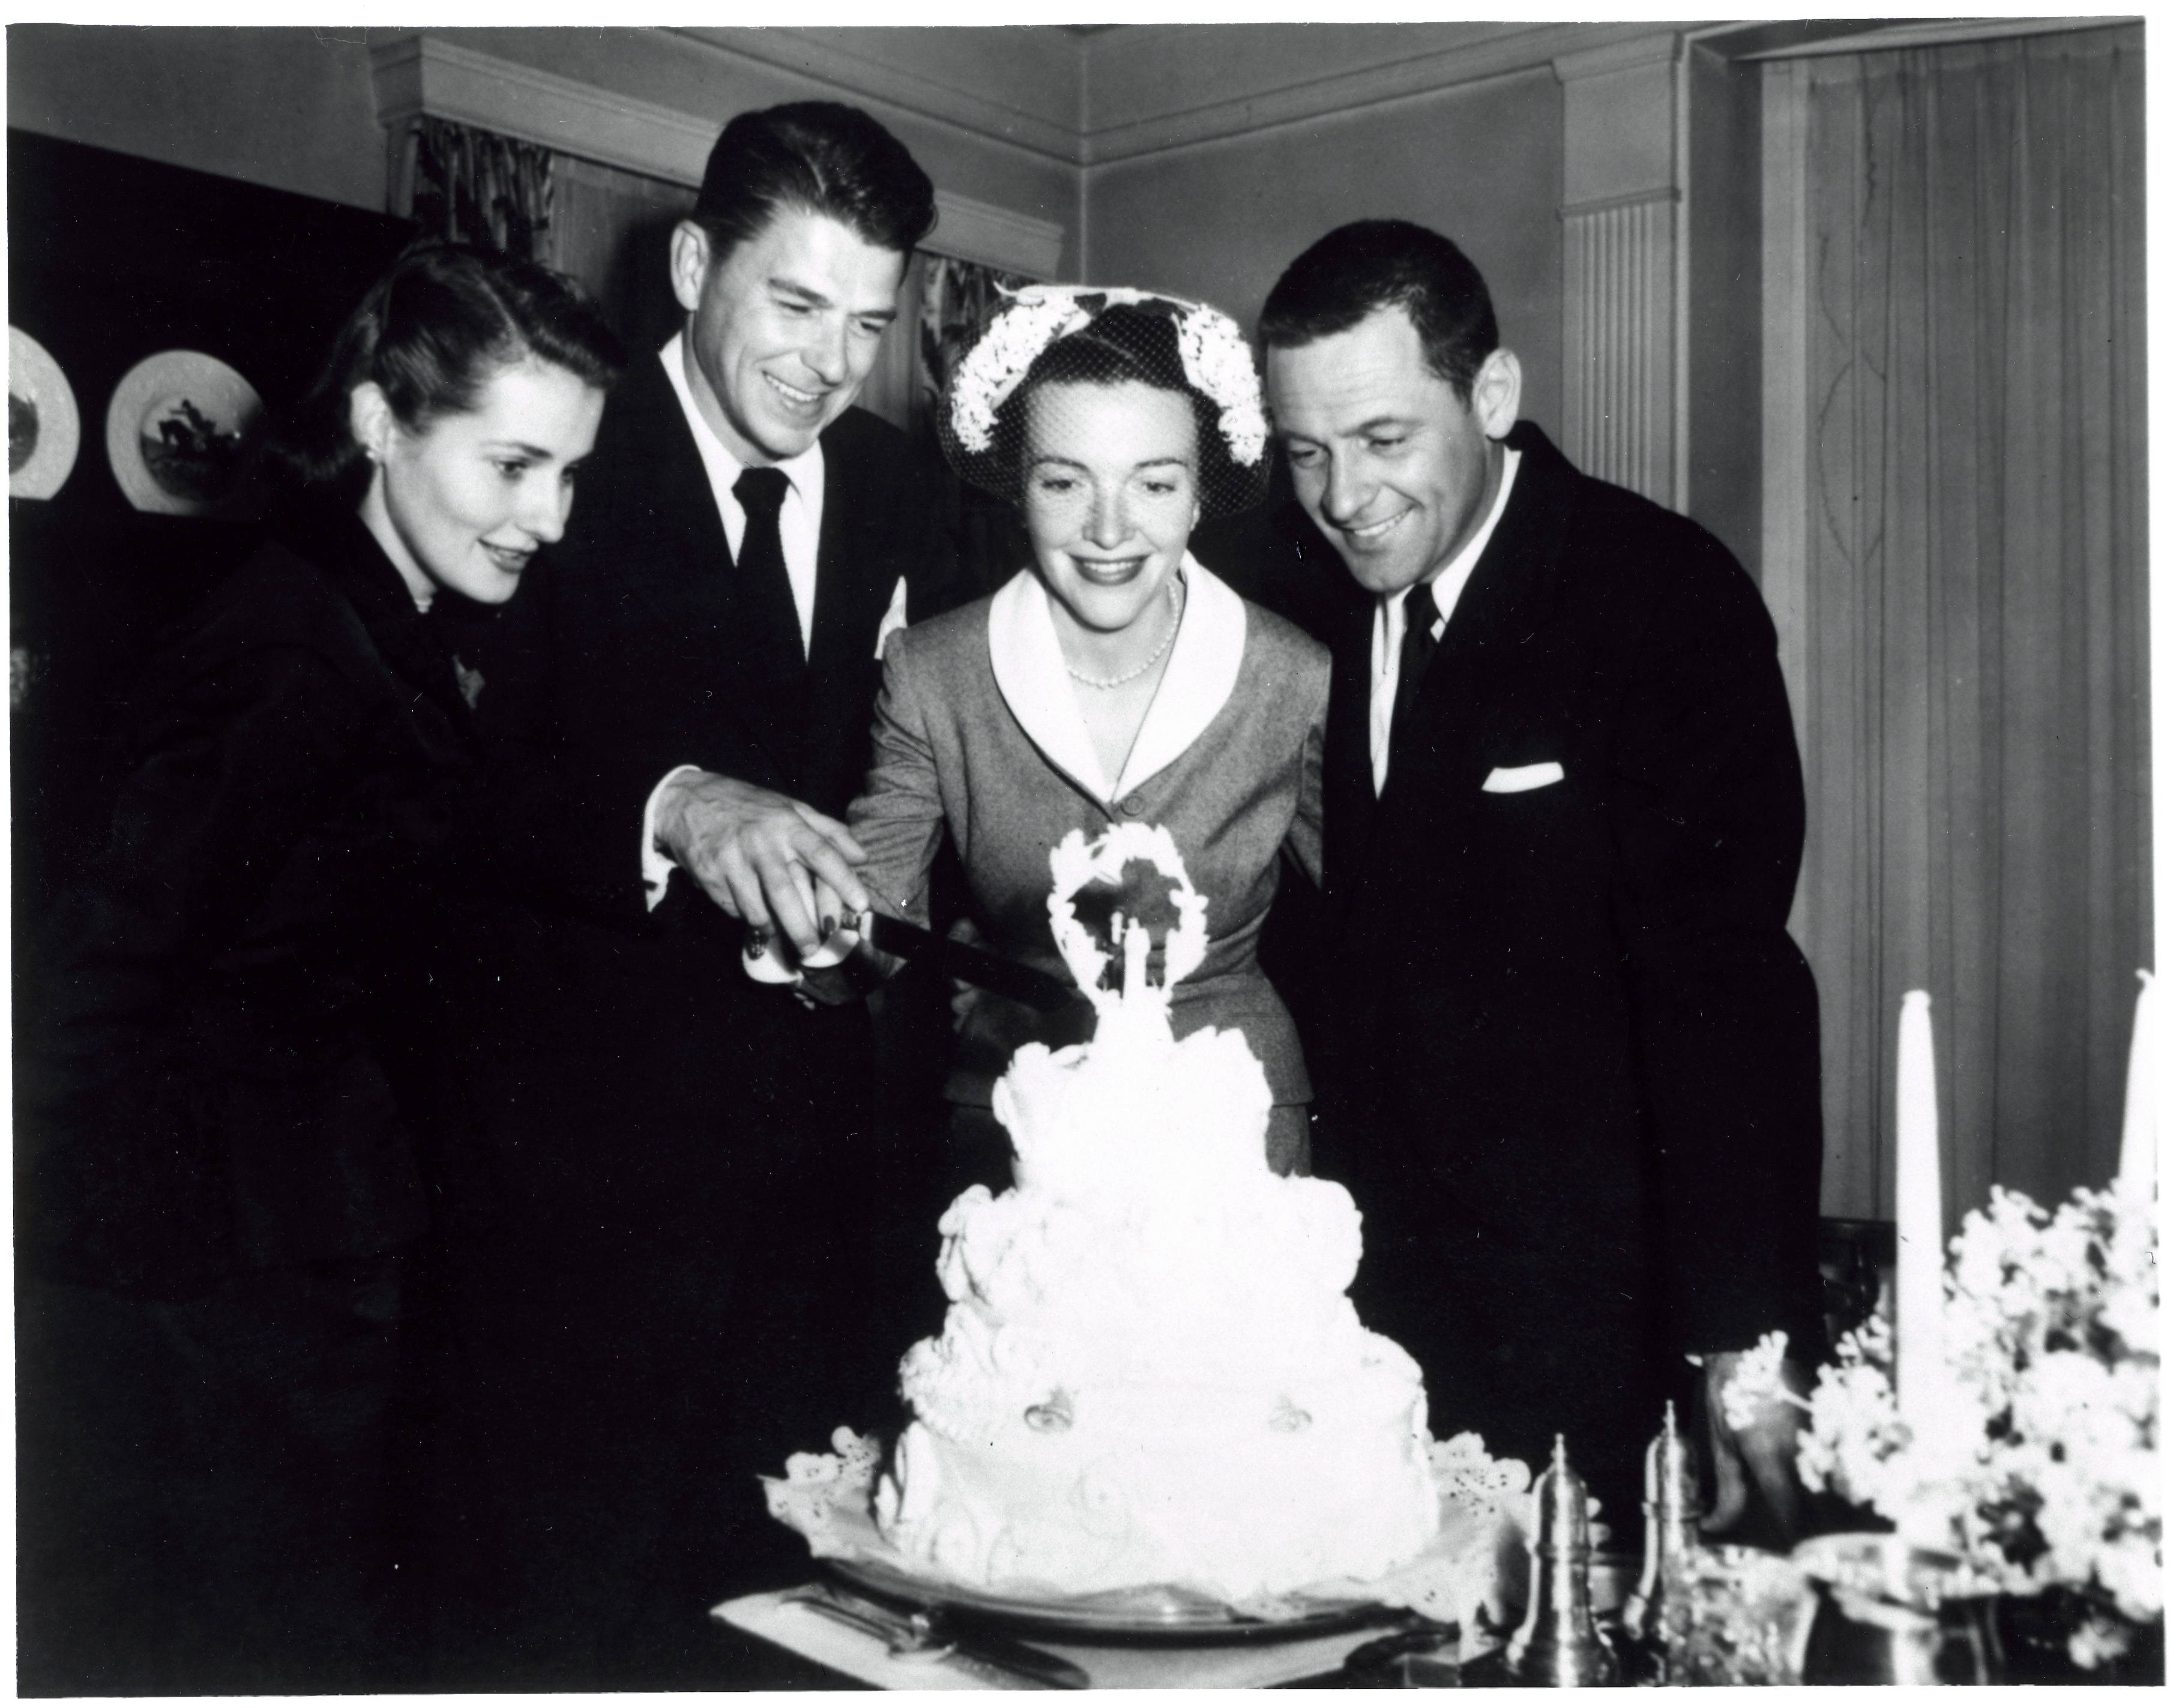 Ronald Reagan, Nancy Reagan, William Holden and Ardis Holden cutting cake after the Reagan’s wedding at the Holden’s house in Toluca Lake, California